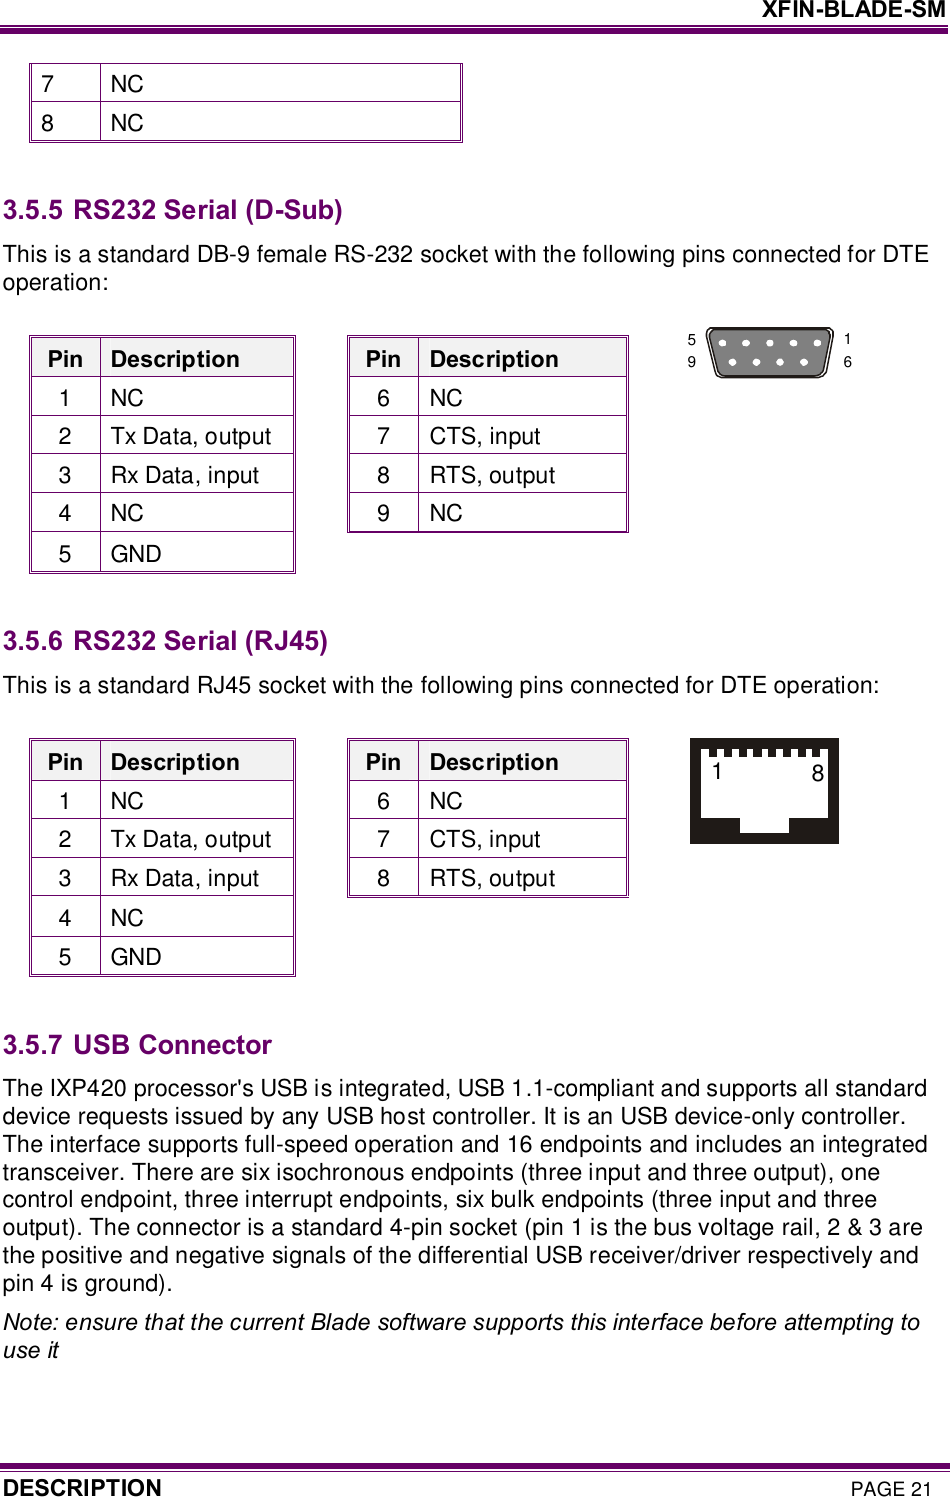     XFIN-BLADE-SM DESCRIPTION PAGE 21 7  NC 8  NC  3.5.5 RS232 Serial (D-Sub) This is a standard DB-9 female RS-232 socket with the following pins connected for DTE operation:  Pin  Description  Pin  Description 1  NC  6  NC 2  Tx Data, output  7  CTS, input 3  Rx Data, input  8  RTS, output 4  NC  9  NC 5  GND    3.5.6 RS232 Serial (RJ45) This is a standard RJ45 socket with the following pins connected for DTE operation:  Pin  Description  Pin  Description 1  NC  6  NC 2  Tx Data, output  7  CTS, input 3  Rx Data, input  8  RTS, output 4  NC     5  GND    3.5.7 USB Connector The IXP420 processor&apos;s USB is integrated, USB 1.1-compliant and supports all standard device requests issued by any USB host controller. It is an USB device-only controller. The interface supports full-speed operation and 16 endpoints and includes an integrated transceiver. There are six isochronous endpoints (three input and three output), one control endpoint, three interrupt endpoints, six bulk endpoints (three input and three output). The connector is a standard 4-pin socket (pin 1 is the bus voltage rail, 2 &amp; 3 are the positive and negative signals of the differential USB receiver/driver respectively and pin 4 is ground). Note: ensure that the current Blade software supports this interface before attempting to use it  1 6 5 9 18